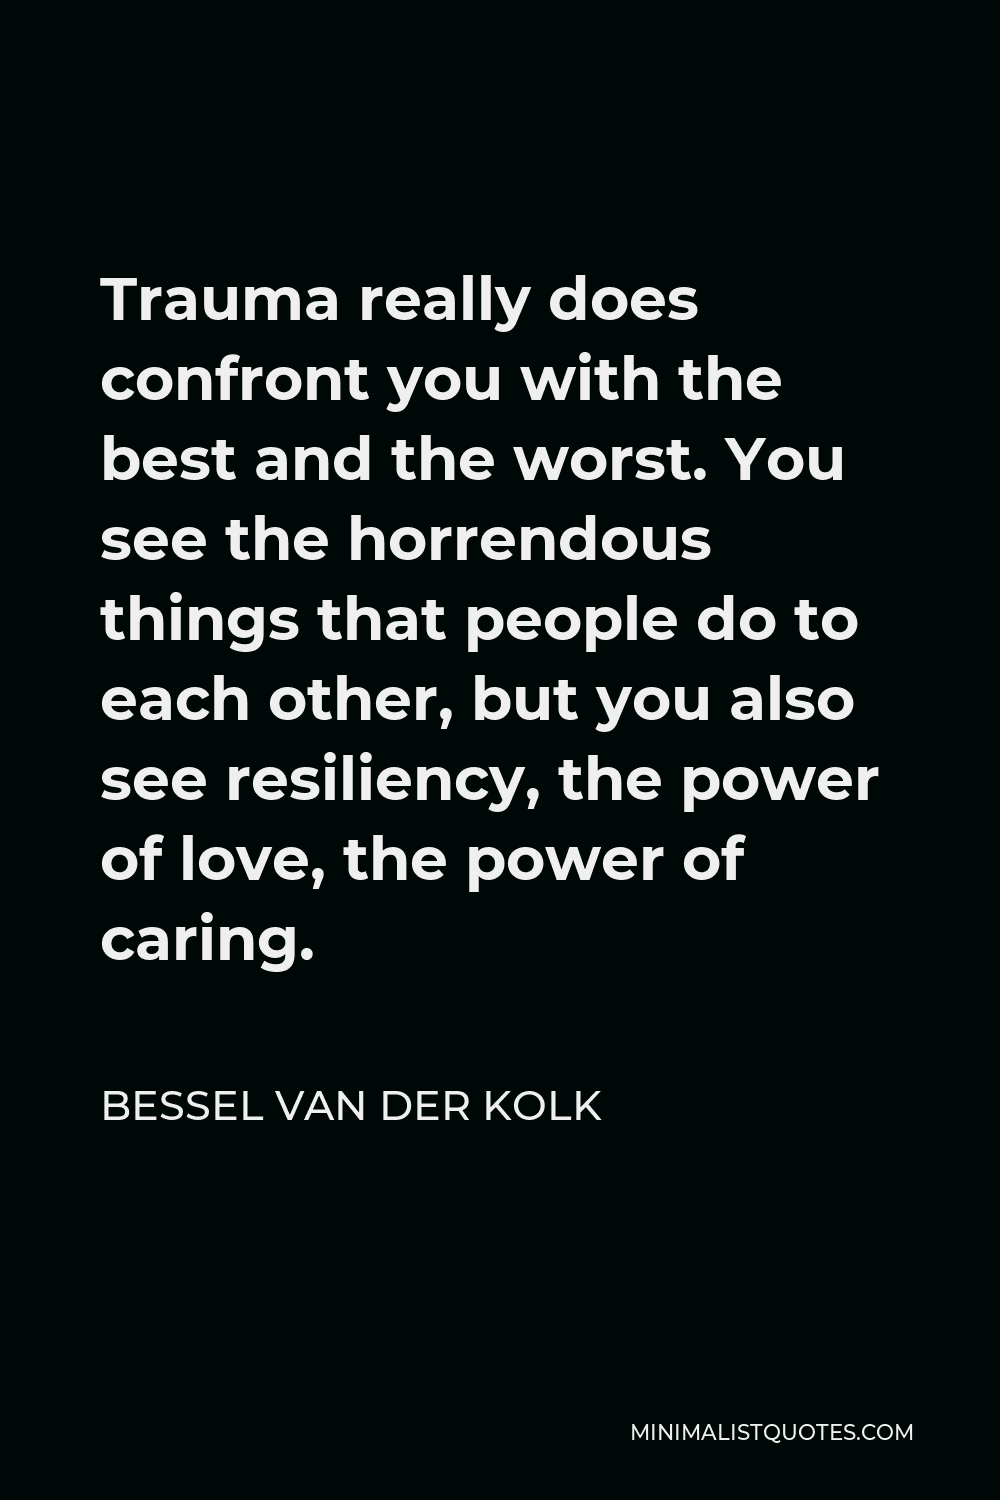 Bessel van der Kolk Quote - Trauma really does confront you with the best and the worst. You see the horrendous things that people do to each other, but you also see resiliency, the power of love, the power of caring.